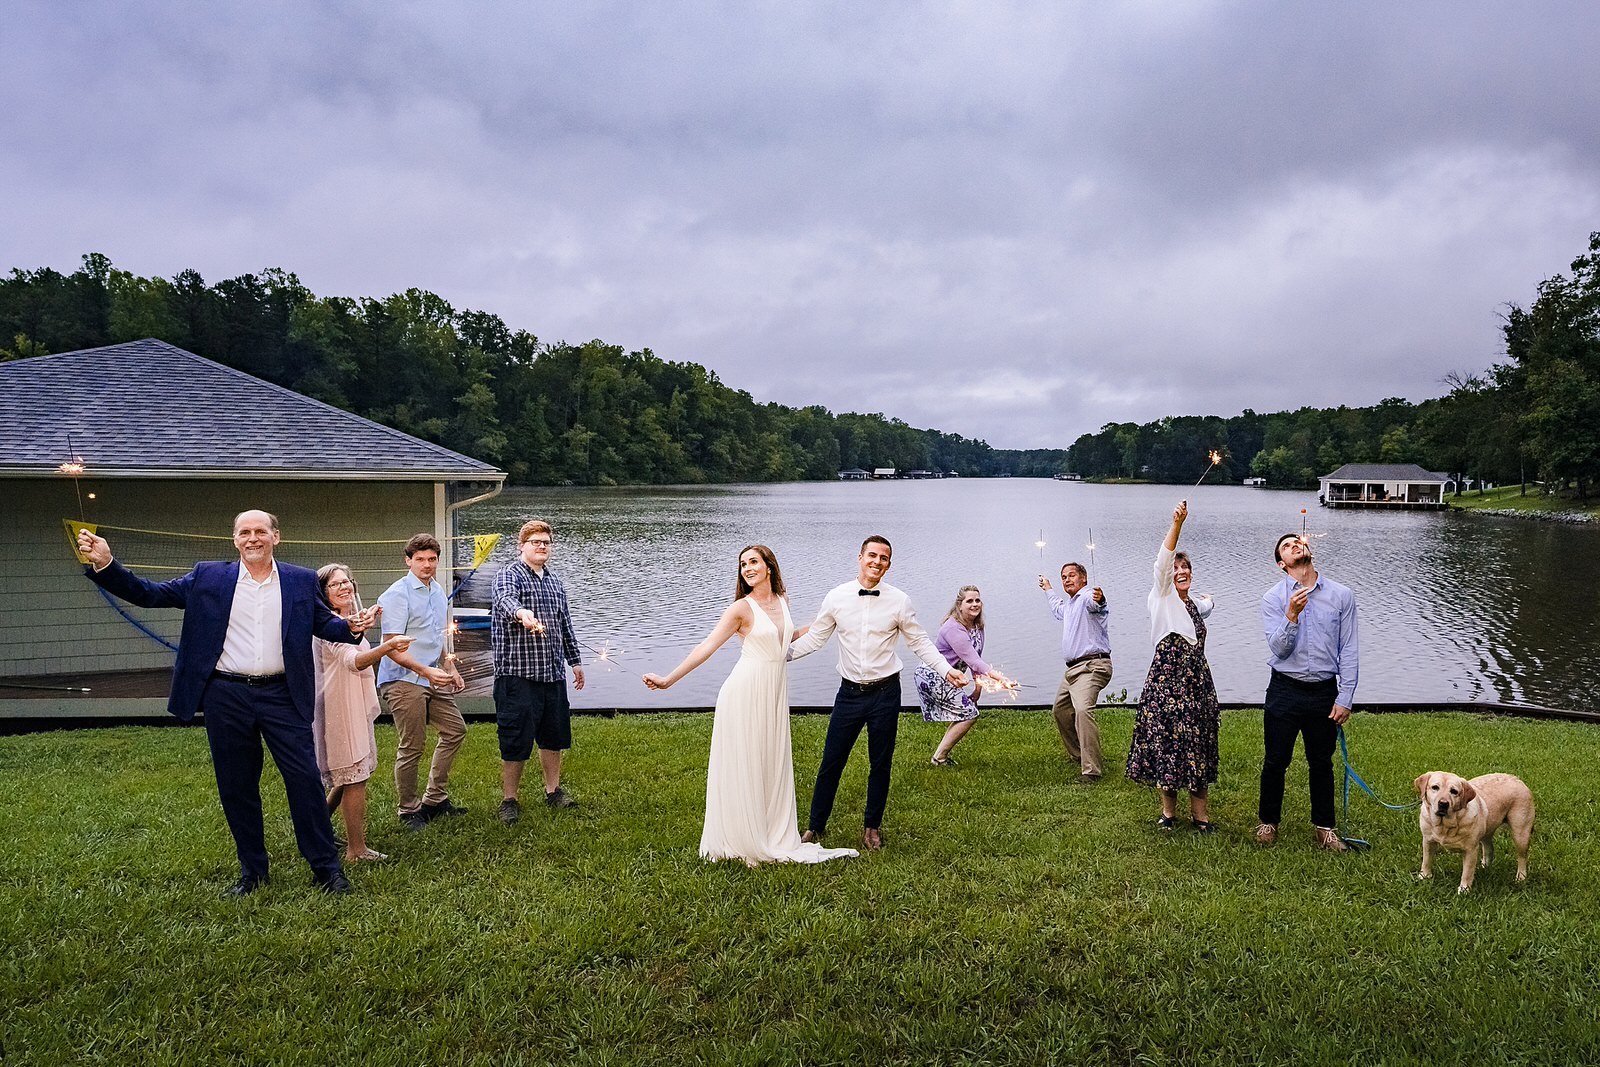 Wedding party poses with sparklers in front of a lake